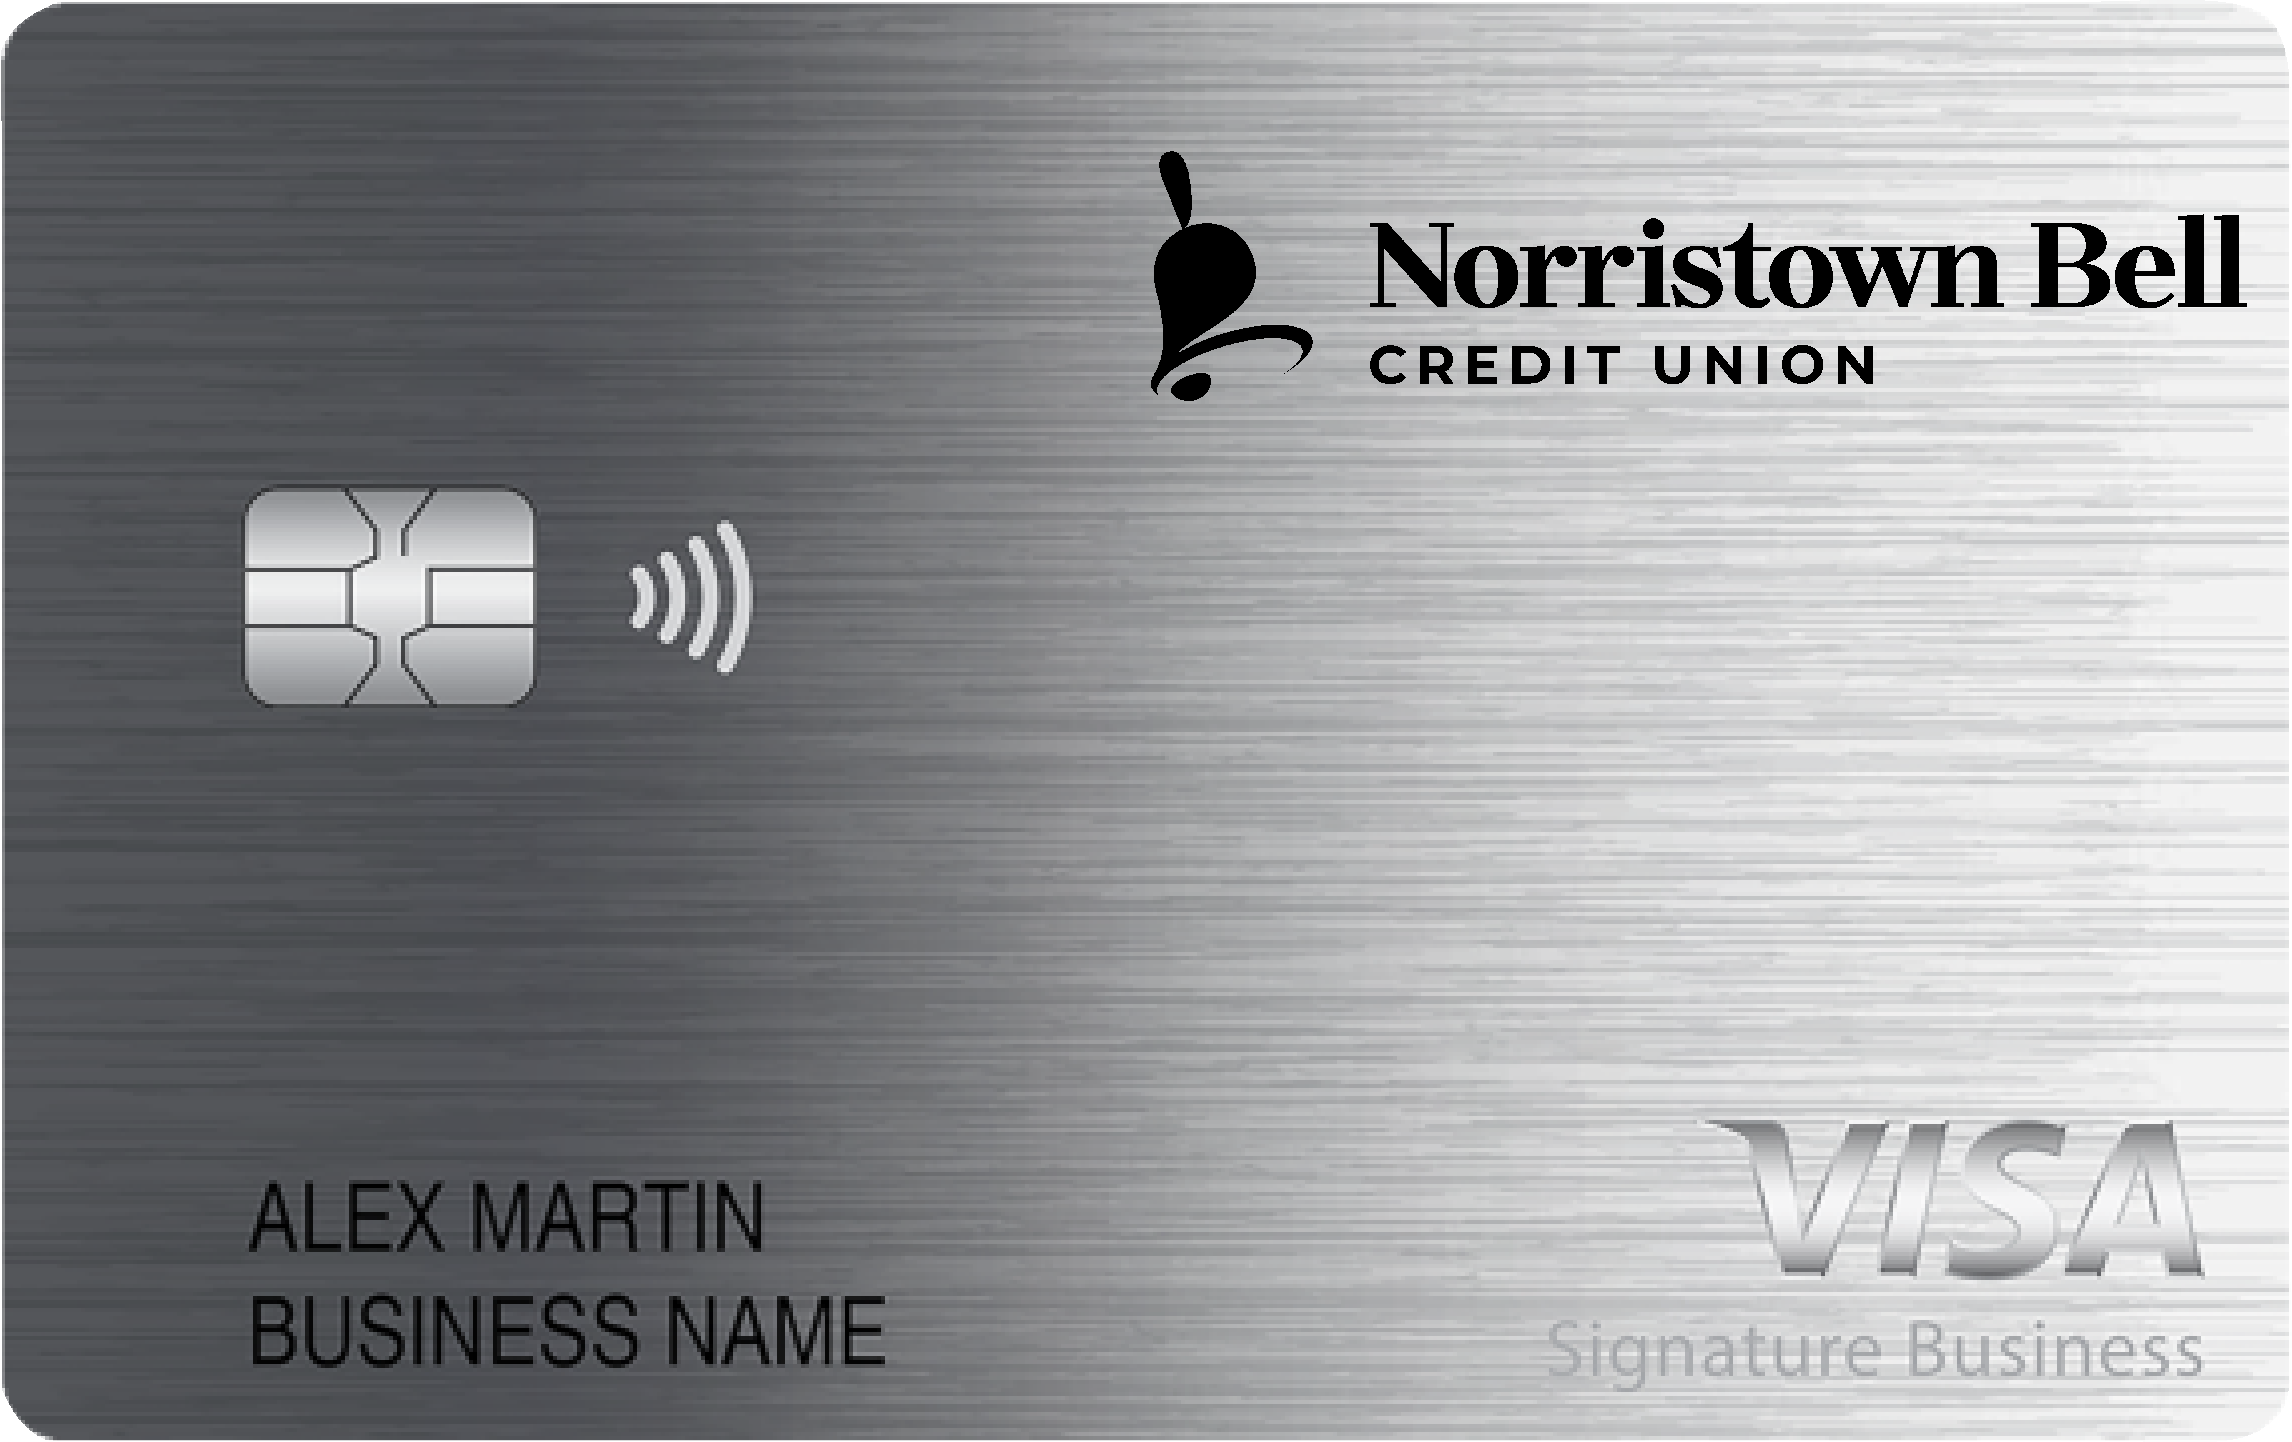 Norristown Bell Credit Union Smart Business Rewards Card